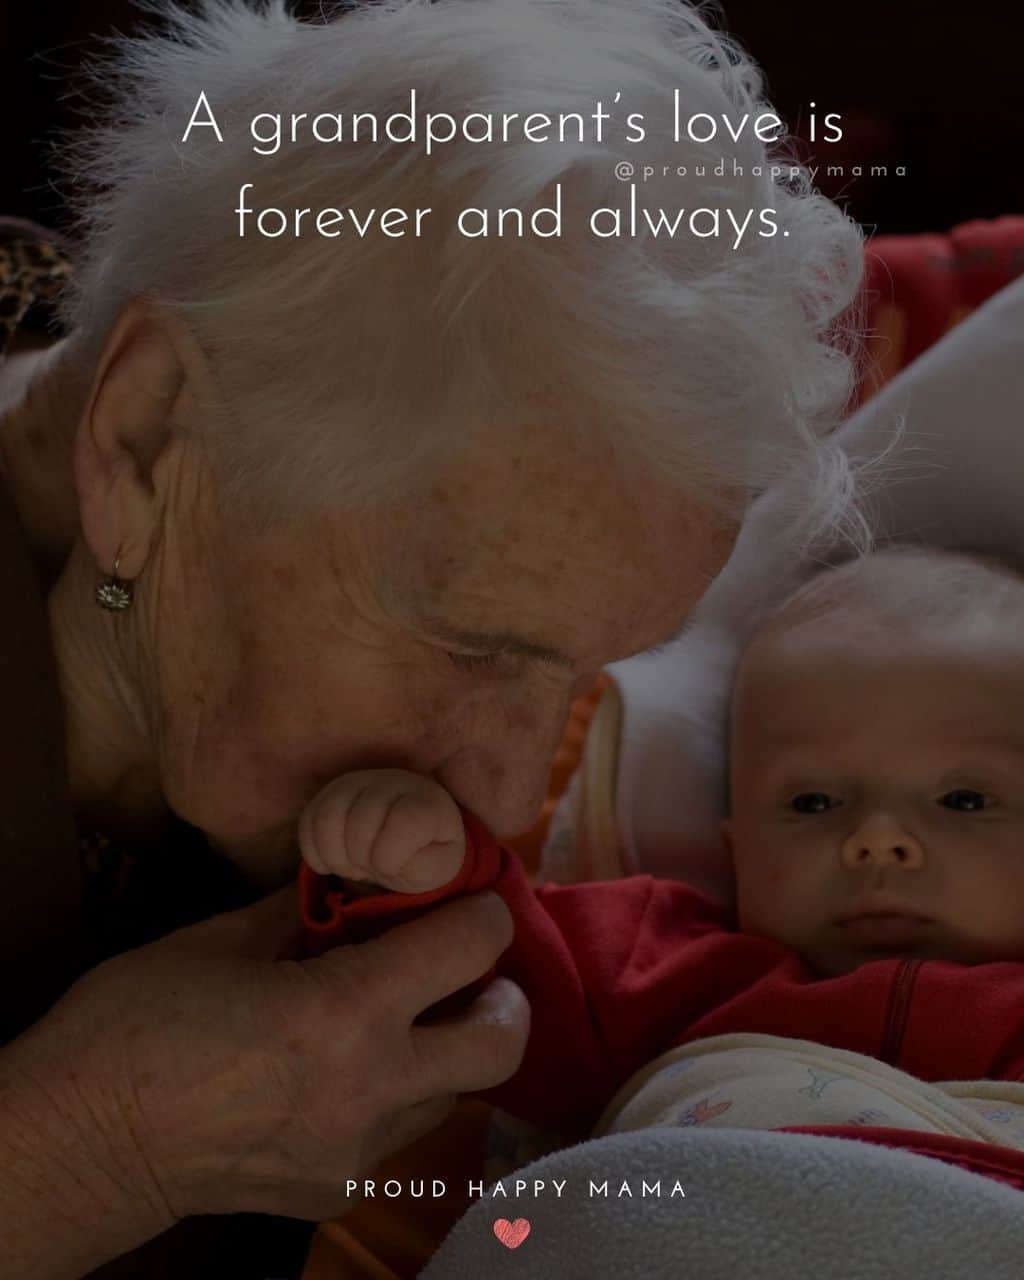 Grandparent Quotes – A grandparent’s love is forever and always.’